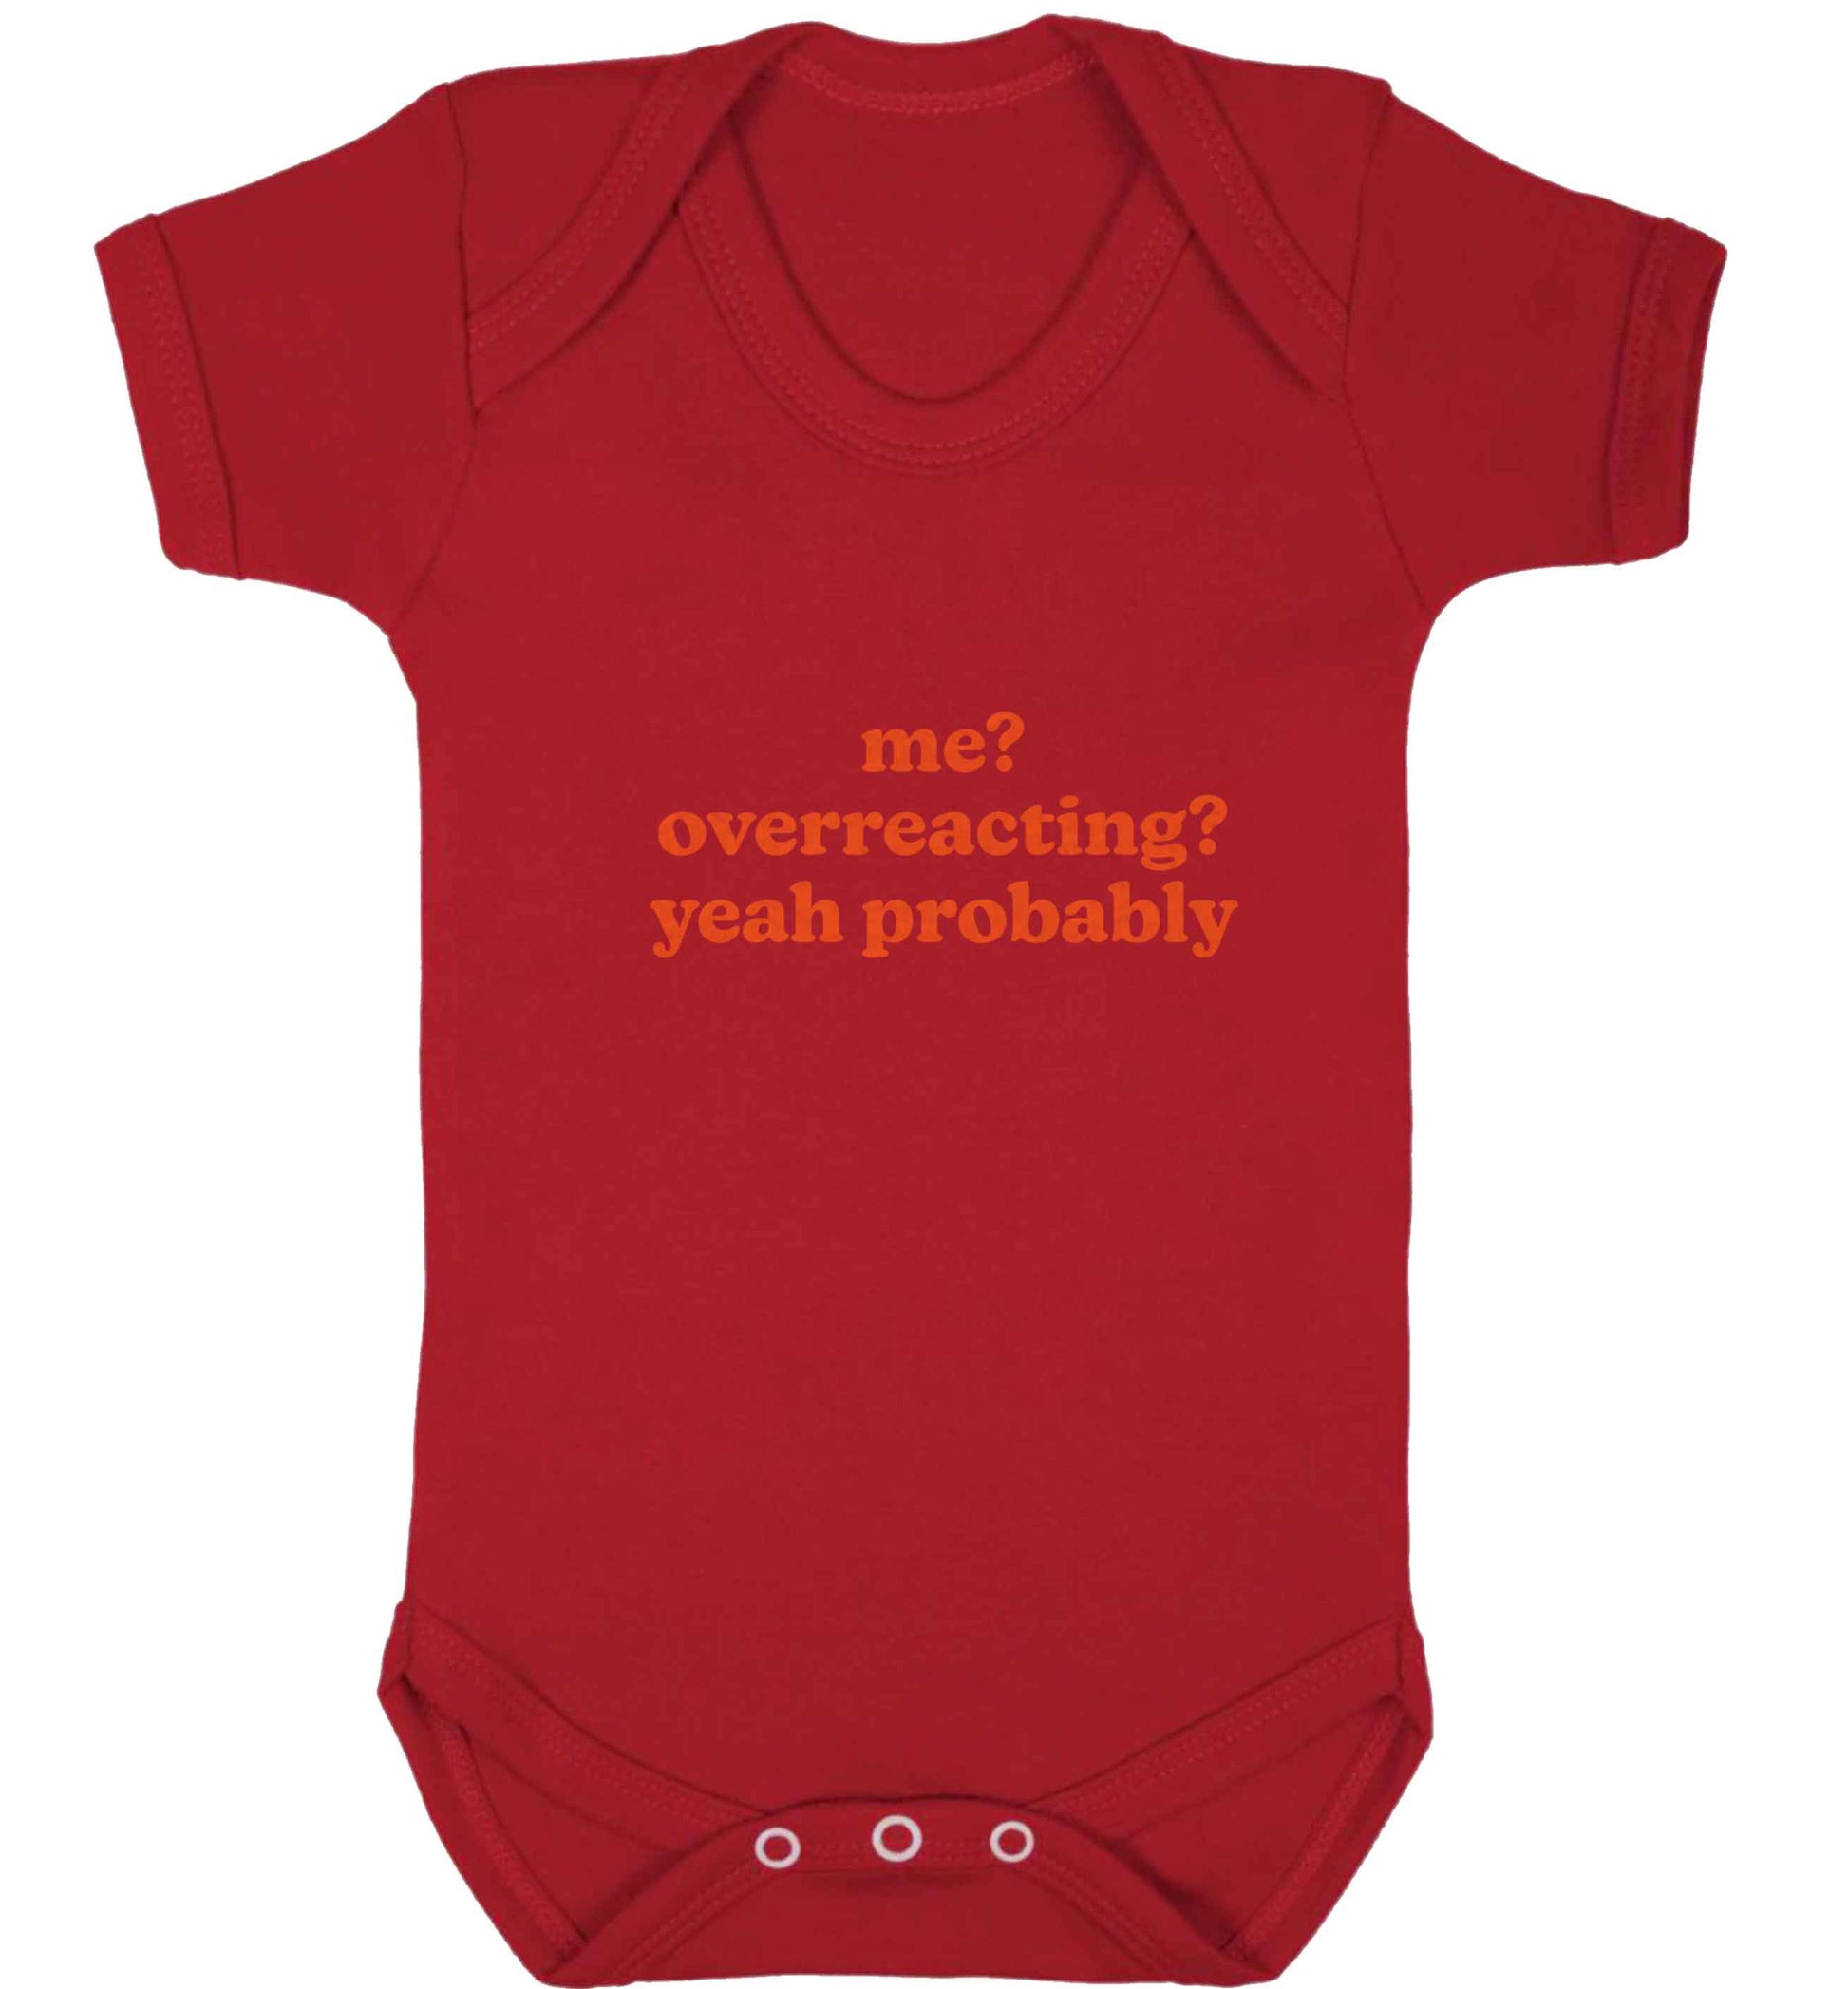 Me? Overreacting? Yeah probably baby vest red 18-24 months